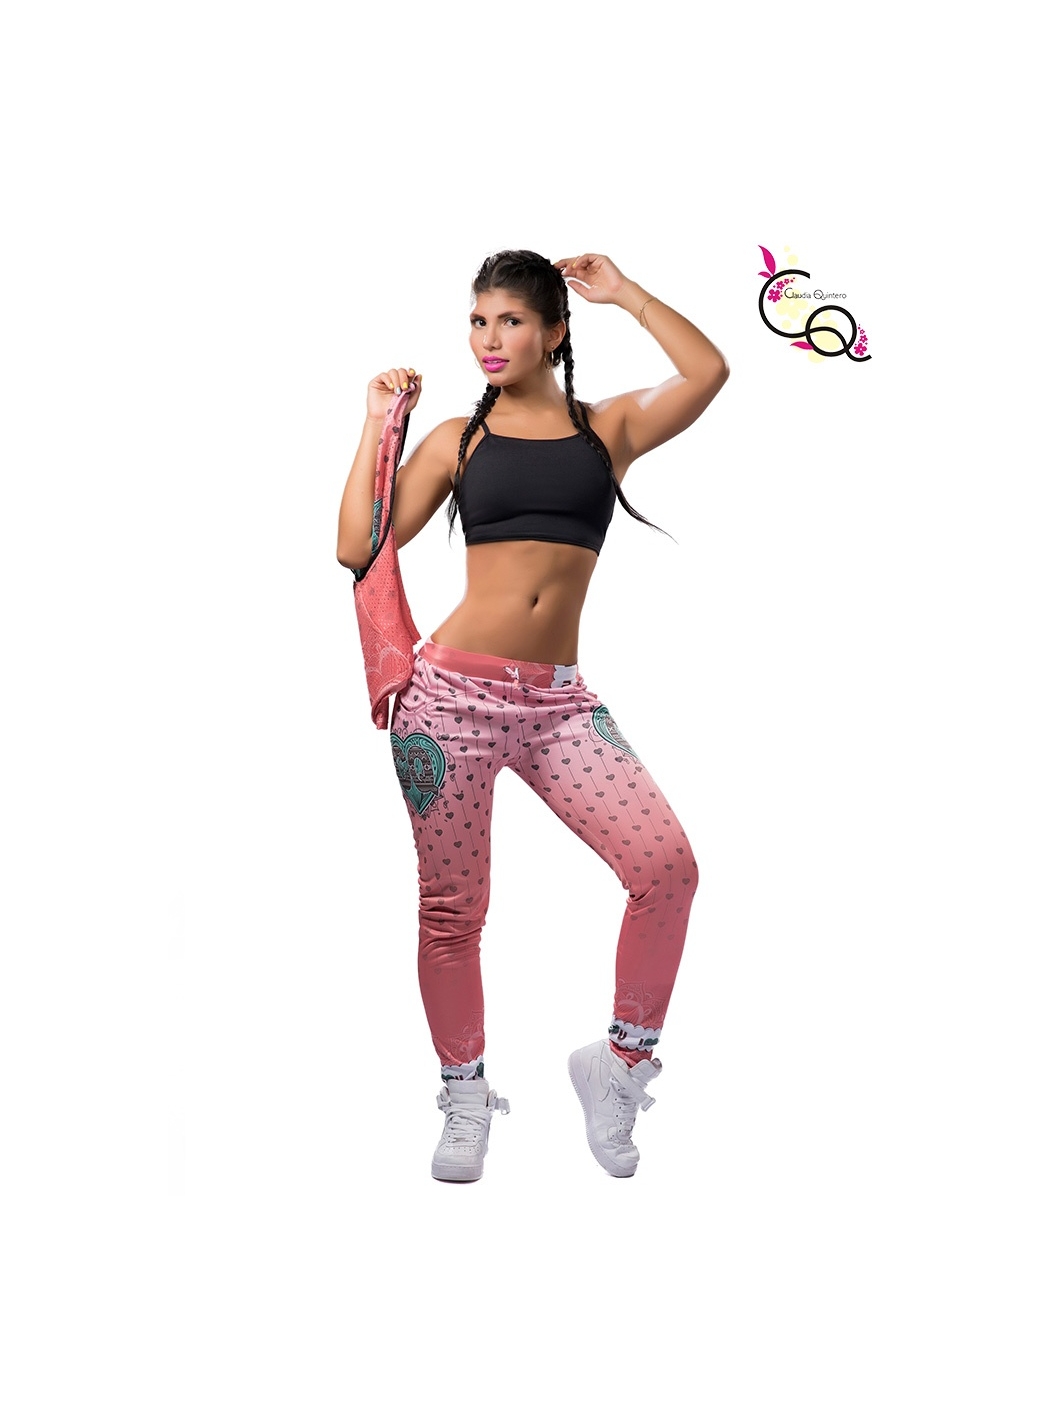 Athletic Attire For Women - Train In Style - B&M Online Store